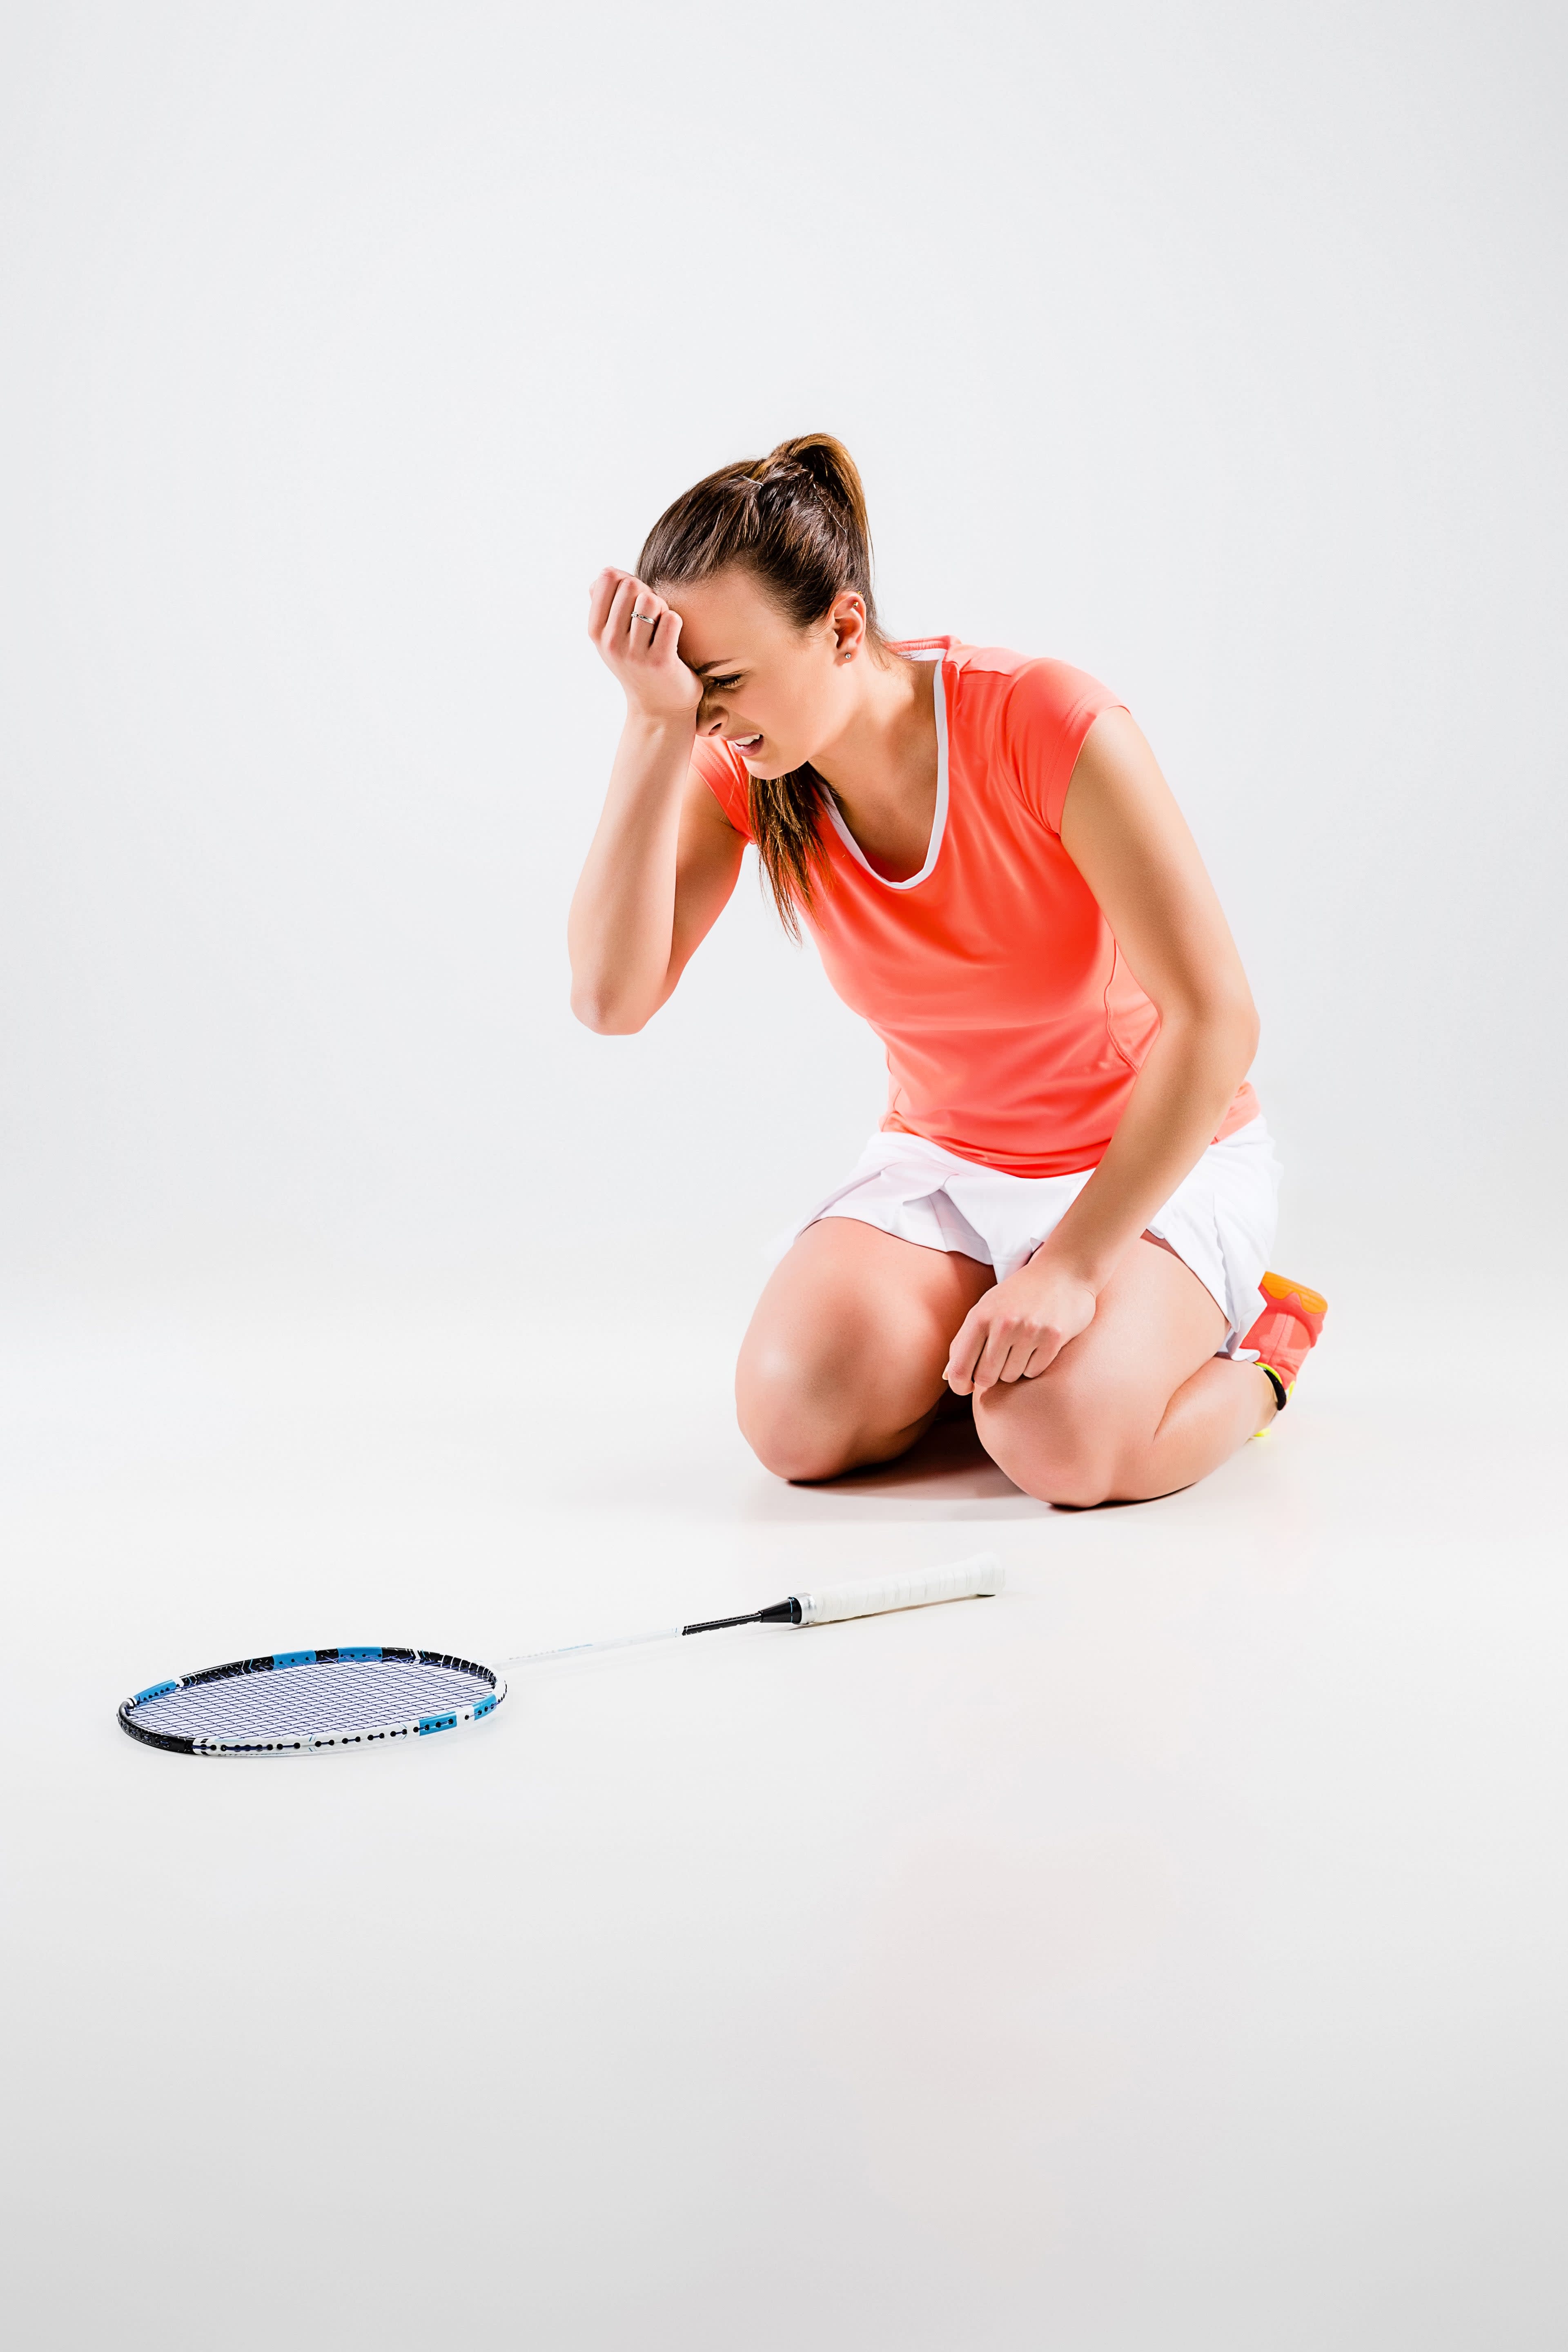 Cover Image for Staying Safe on the Tennis Court: Injury Prevention Tips